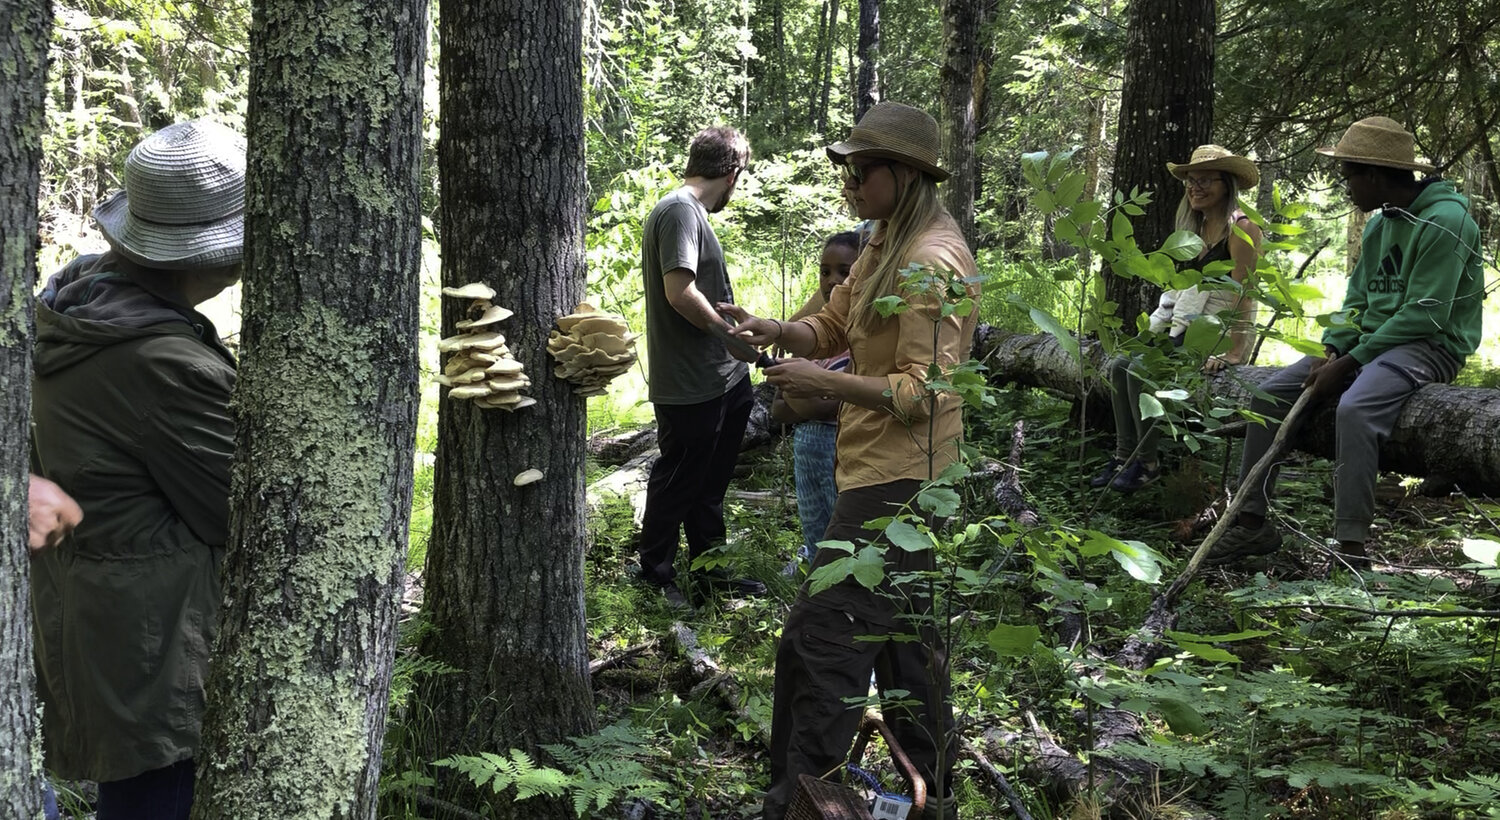 An instructor holds a blade, preparing to remove oyster mushrooms from a tree. Students watch.